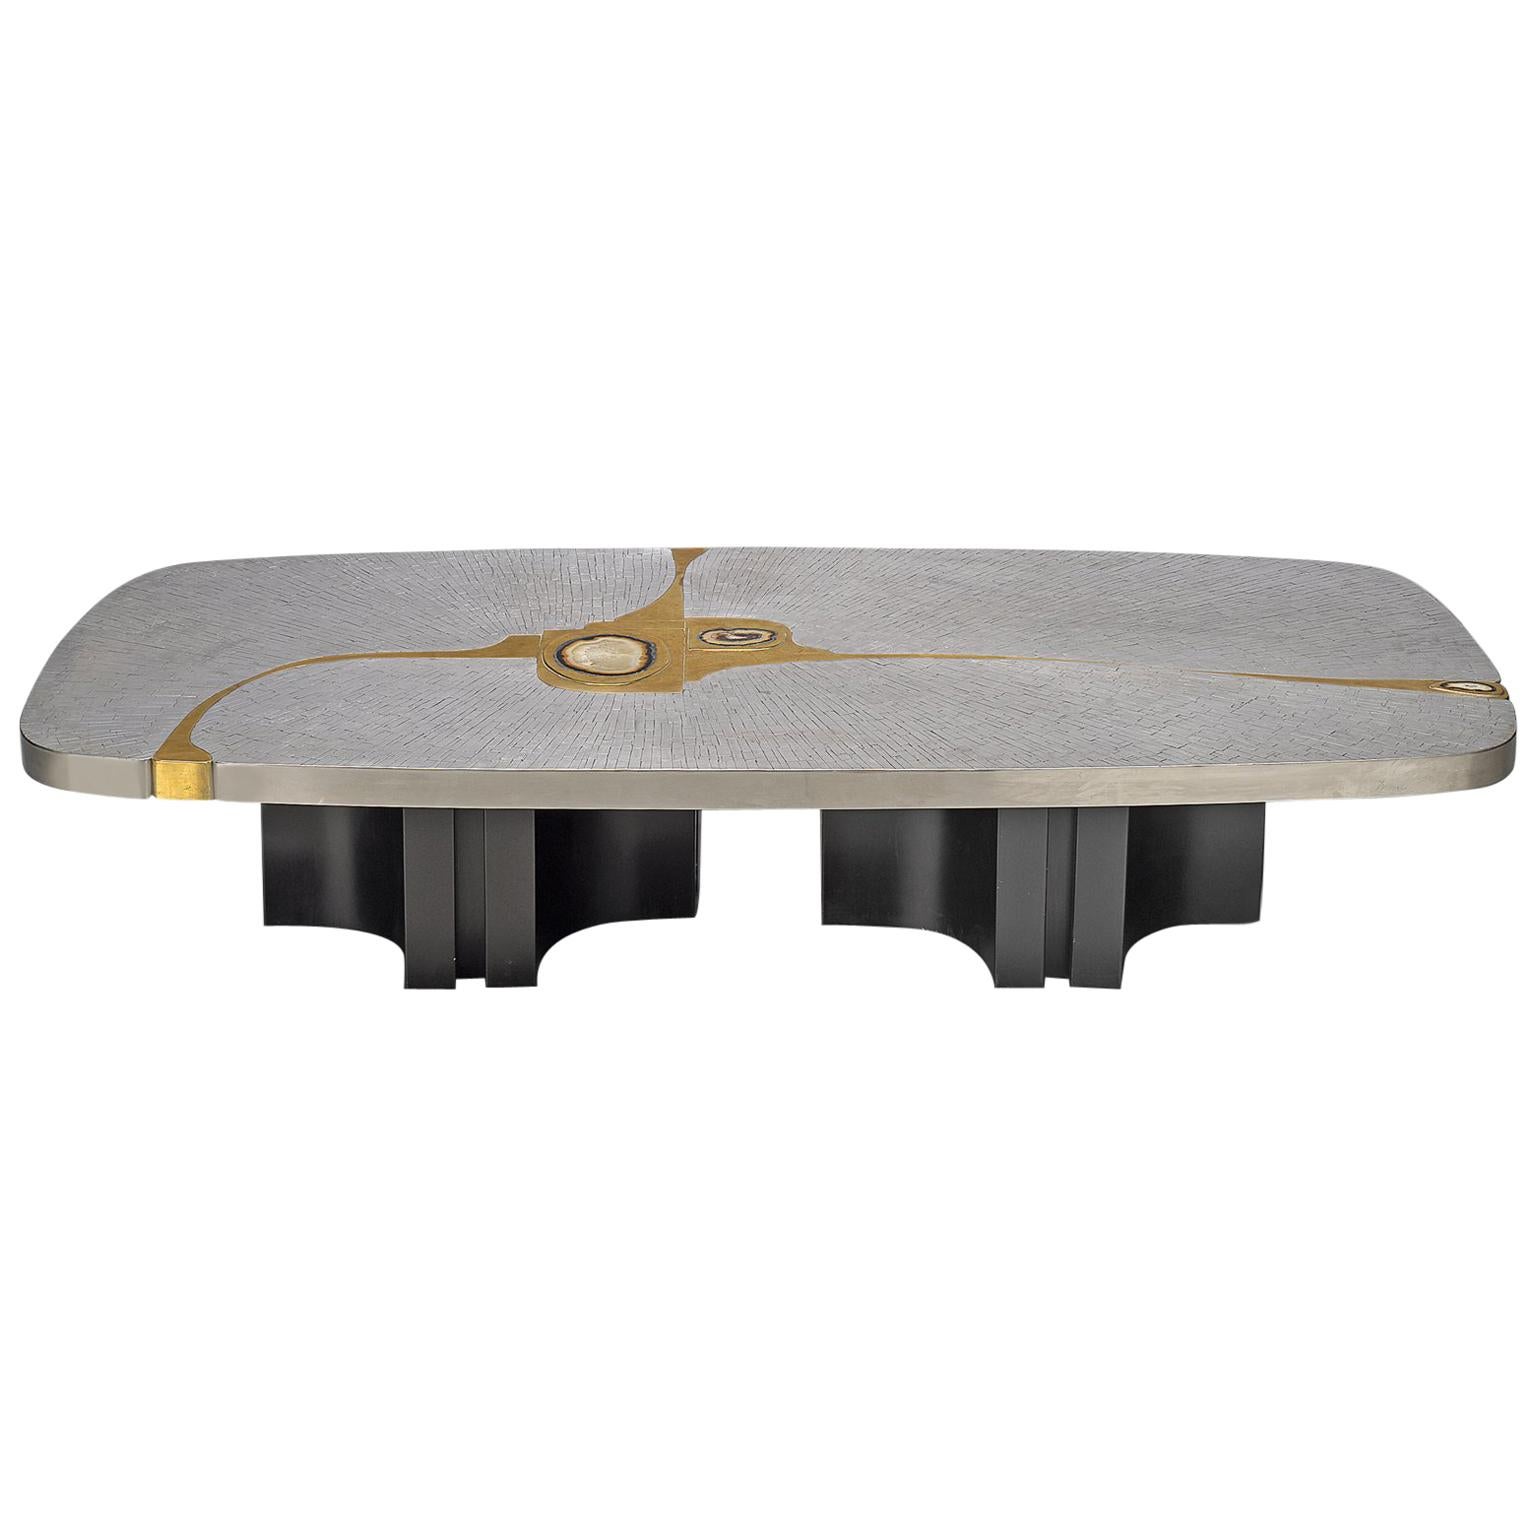 Jean Claude Dresse Steel and Brass Coffee Table with Inlayed Agate